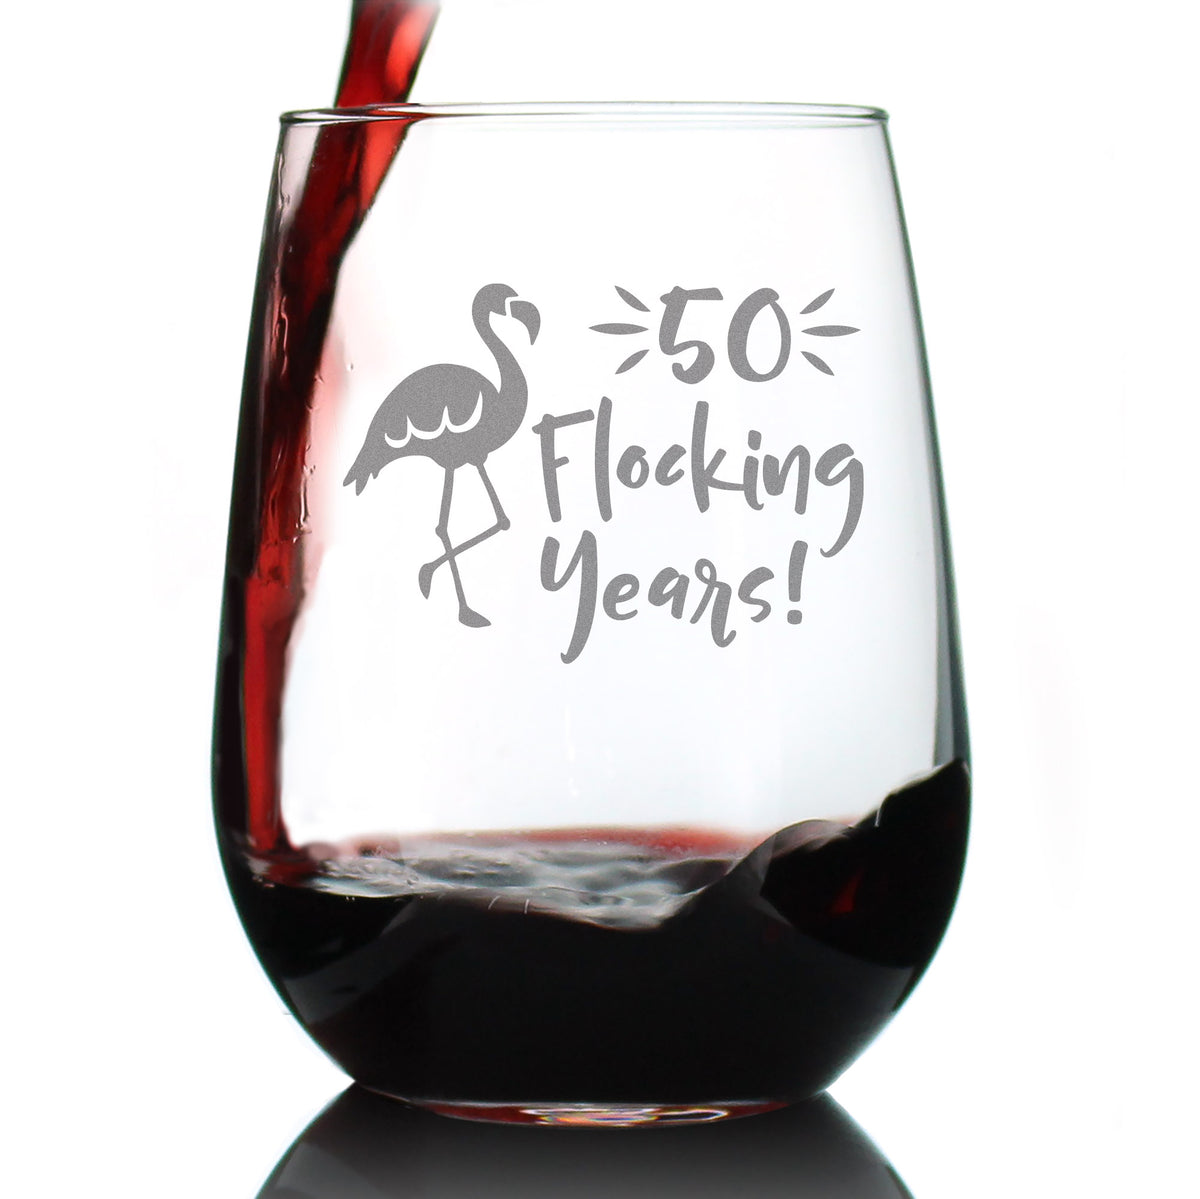 50 Flocking Years - Funny Flamingo Stemless Wine Glass Gift for 50th Birthday, Anniversary or Reunion - Large